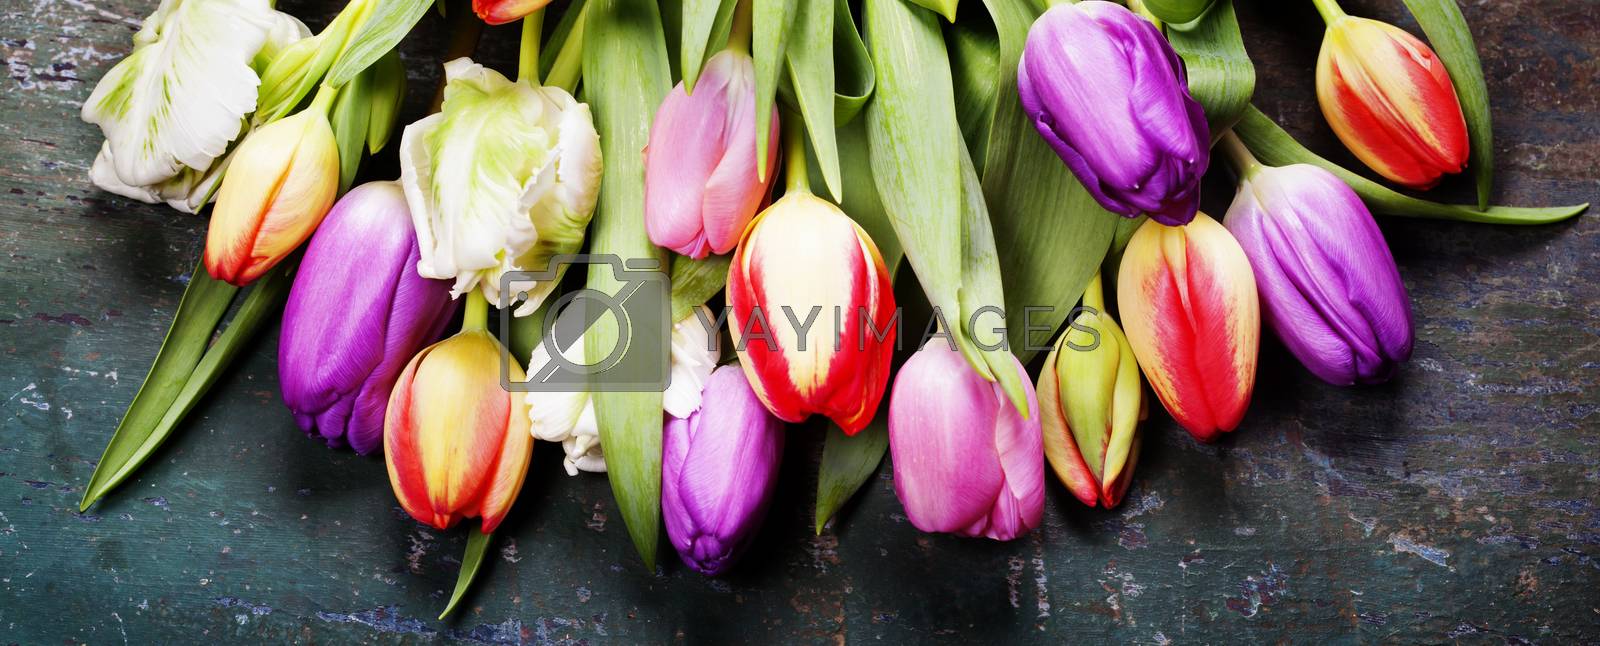 Royalty free image of Tulips on a wooden background  by klenova